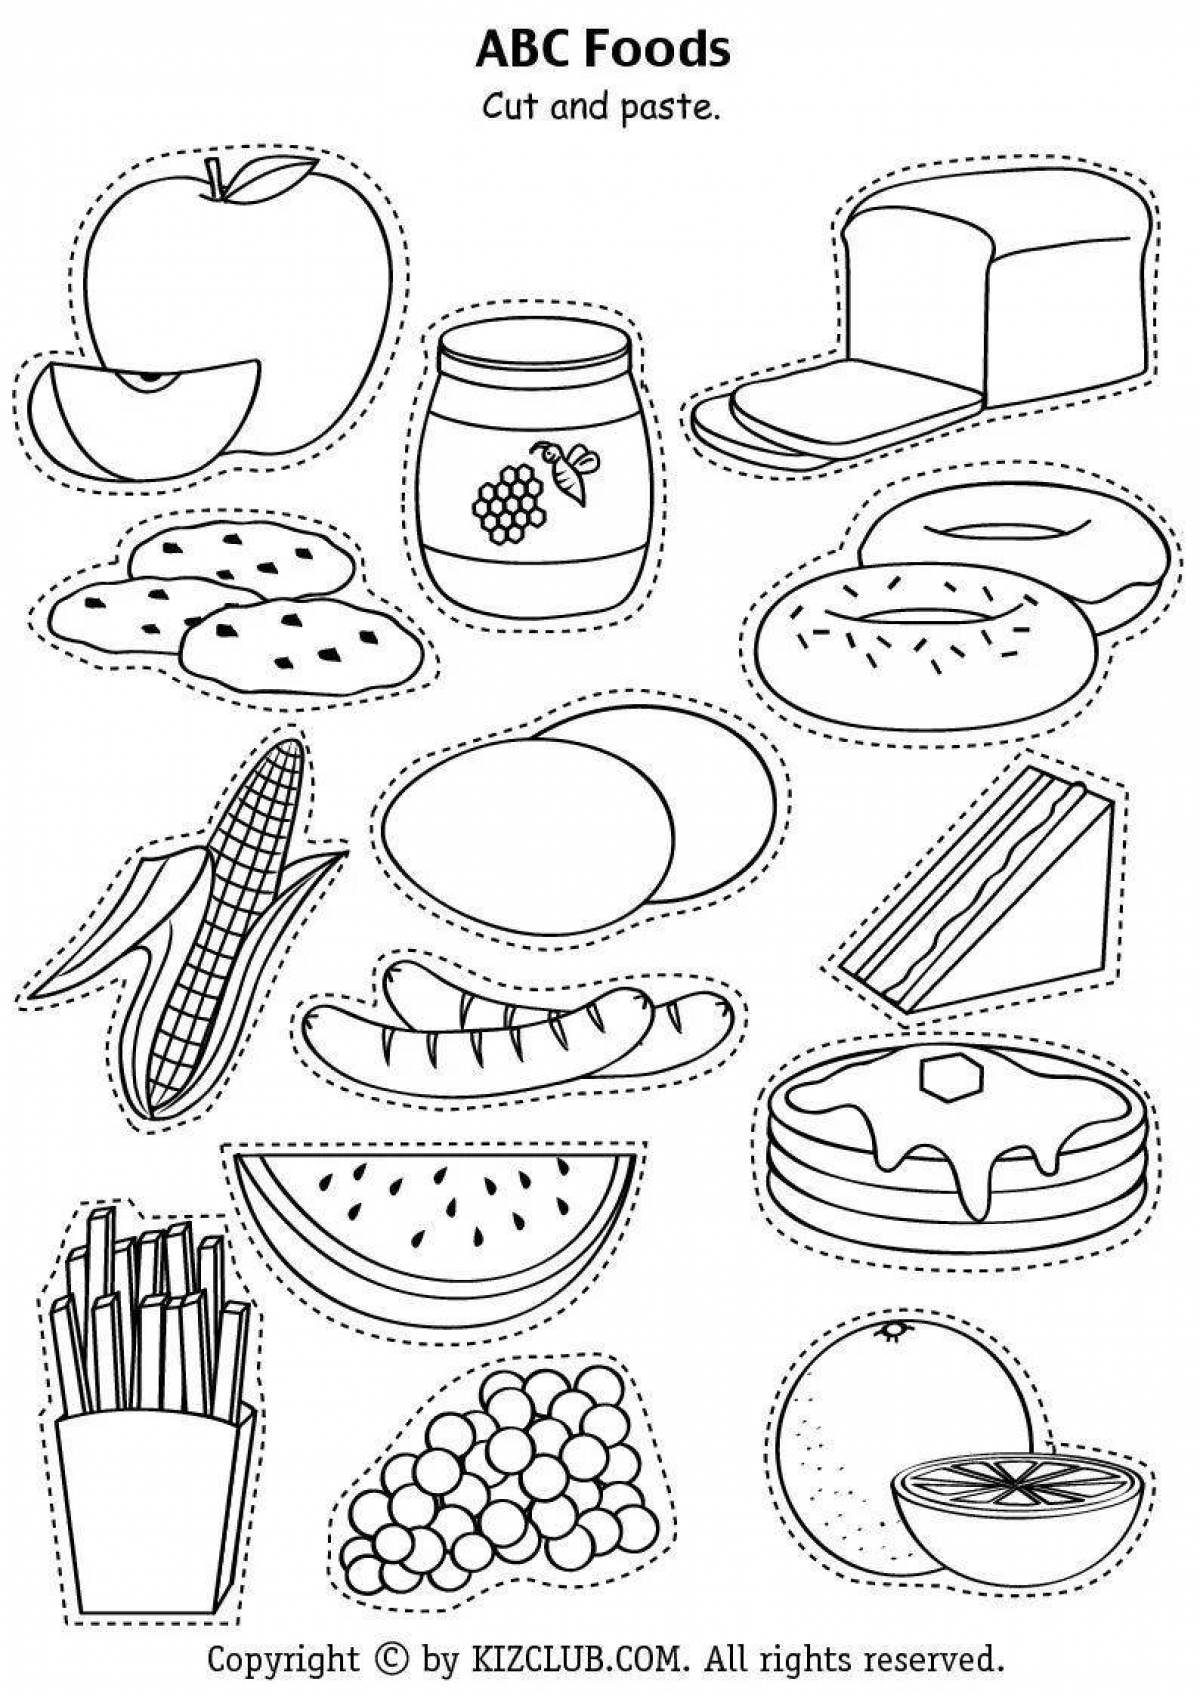 Colorful English food coloring book with alphabet